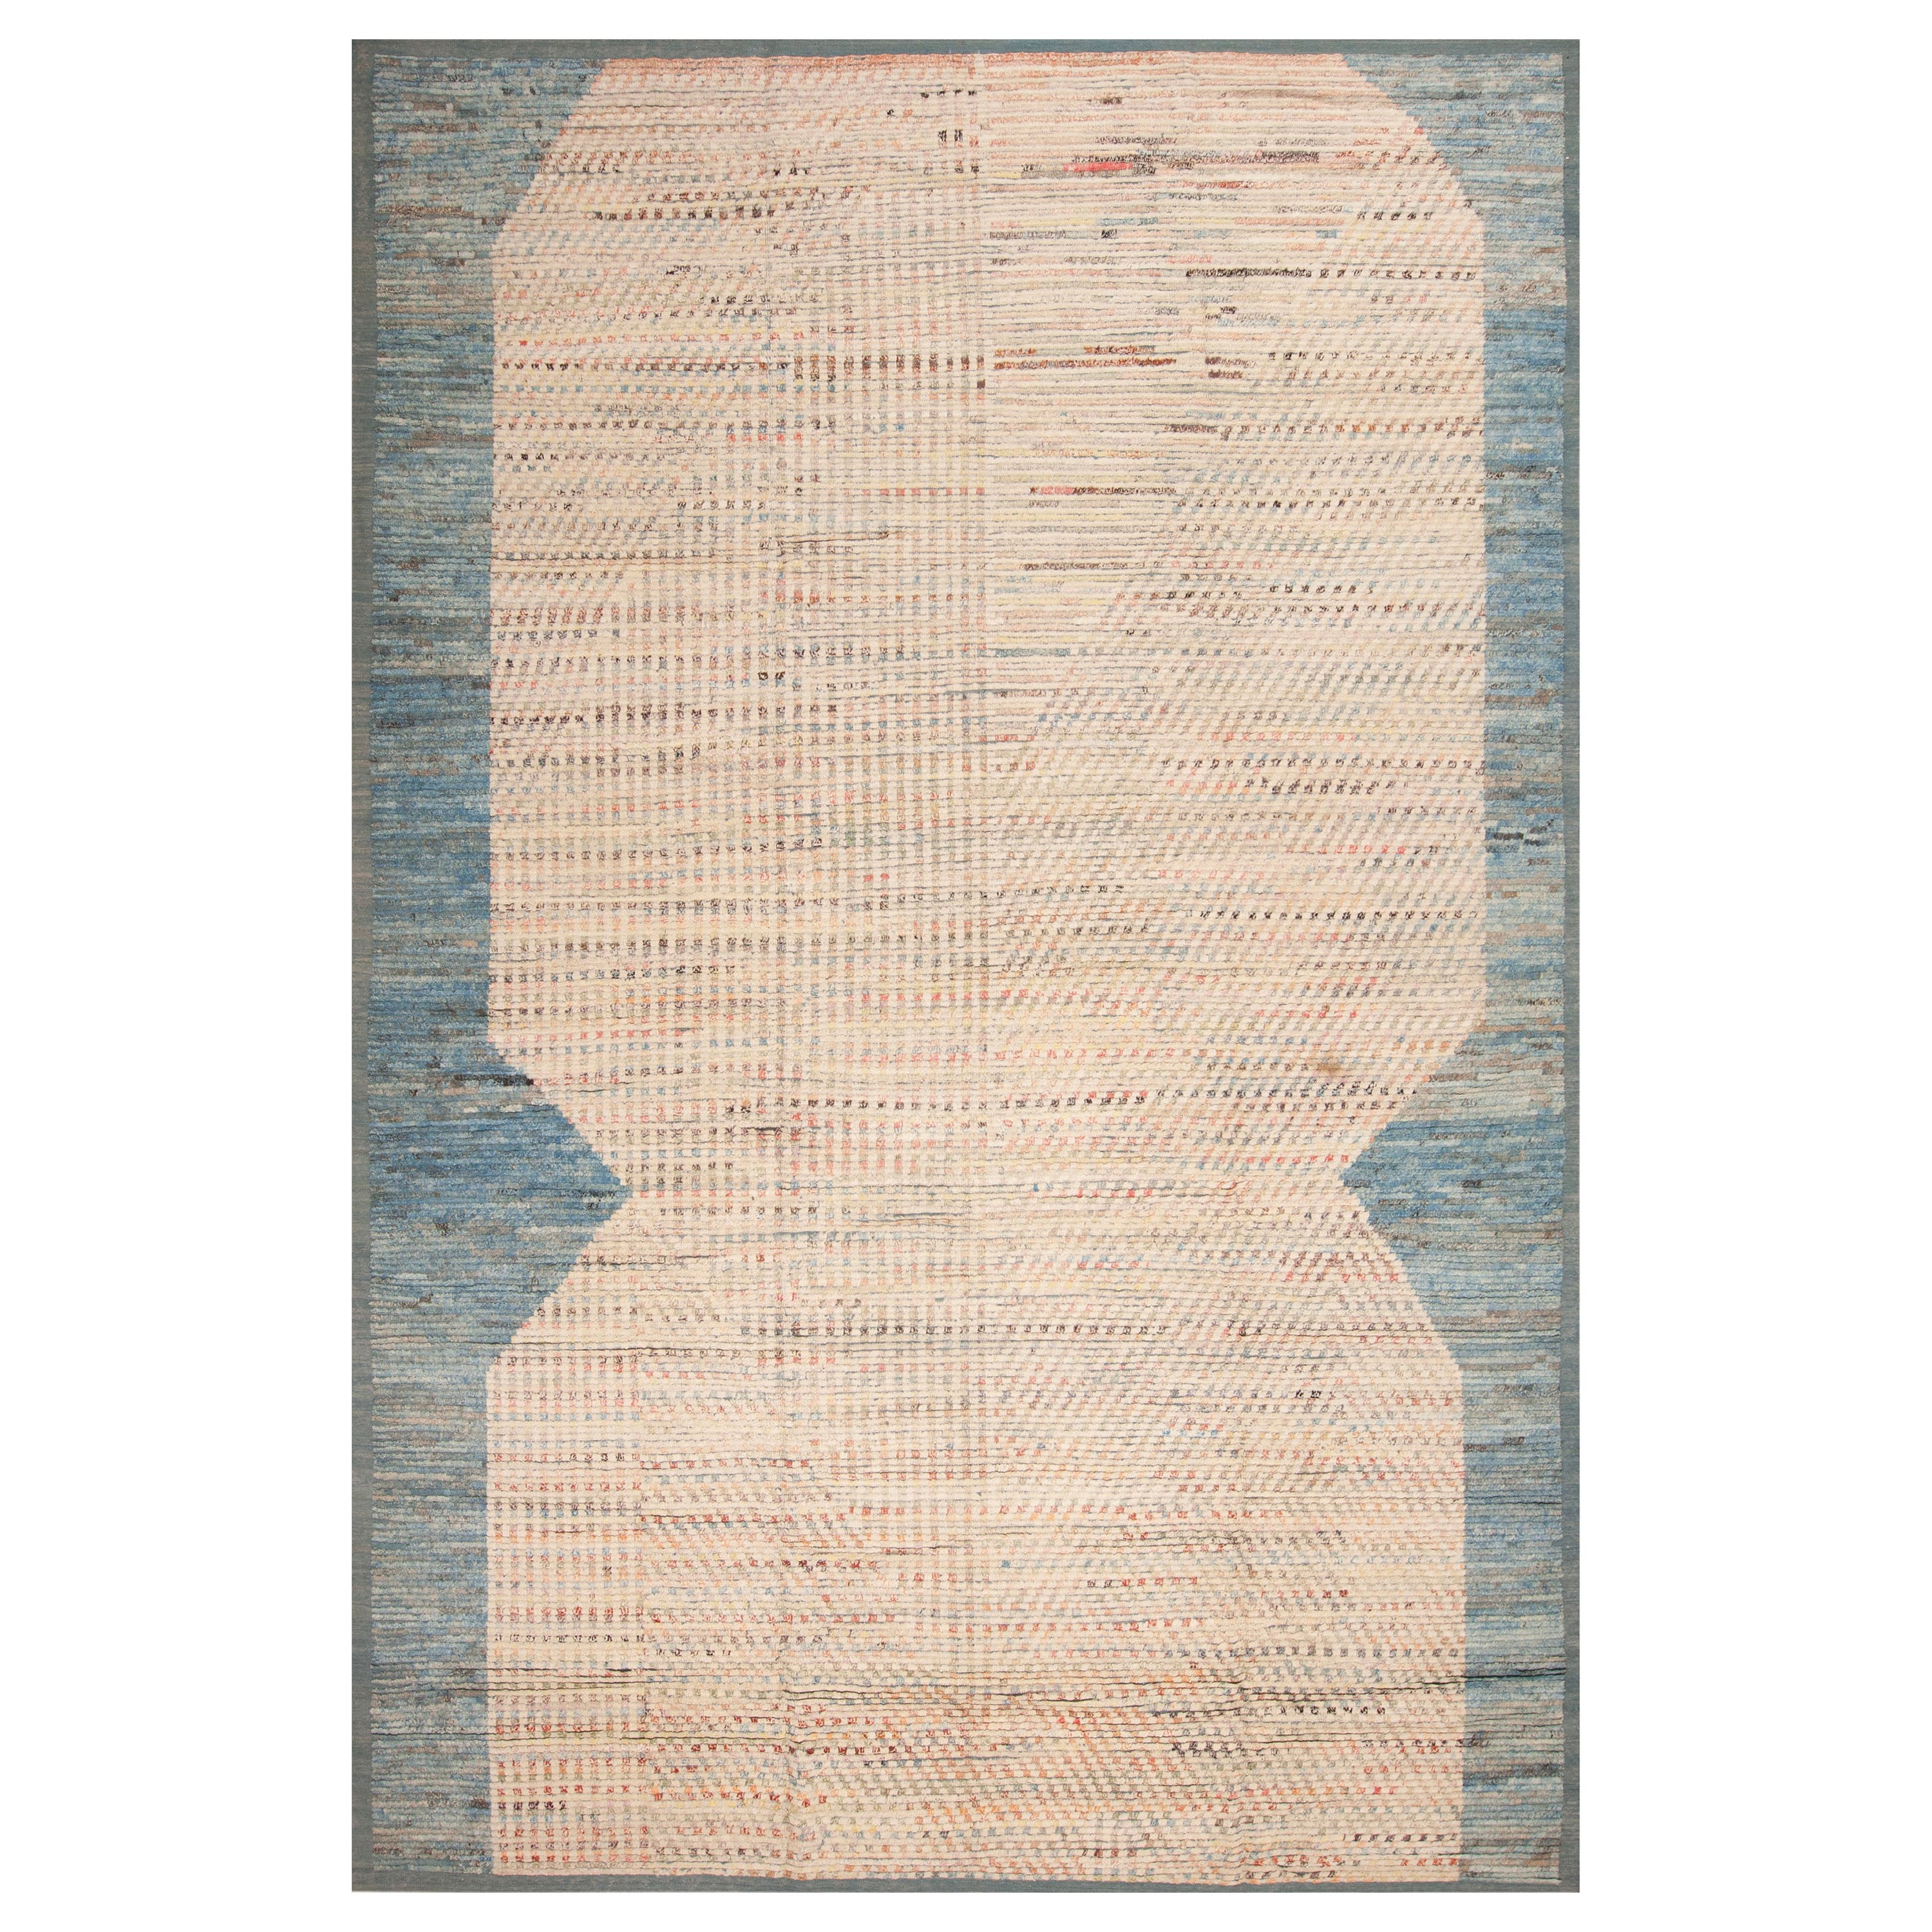 Collection Nazmiyal collection Rustic Tribal Geometric Pattern Modern Area Rug 9'6" x 14'